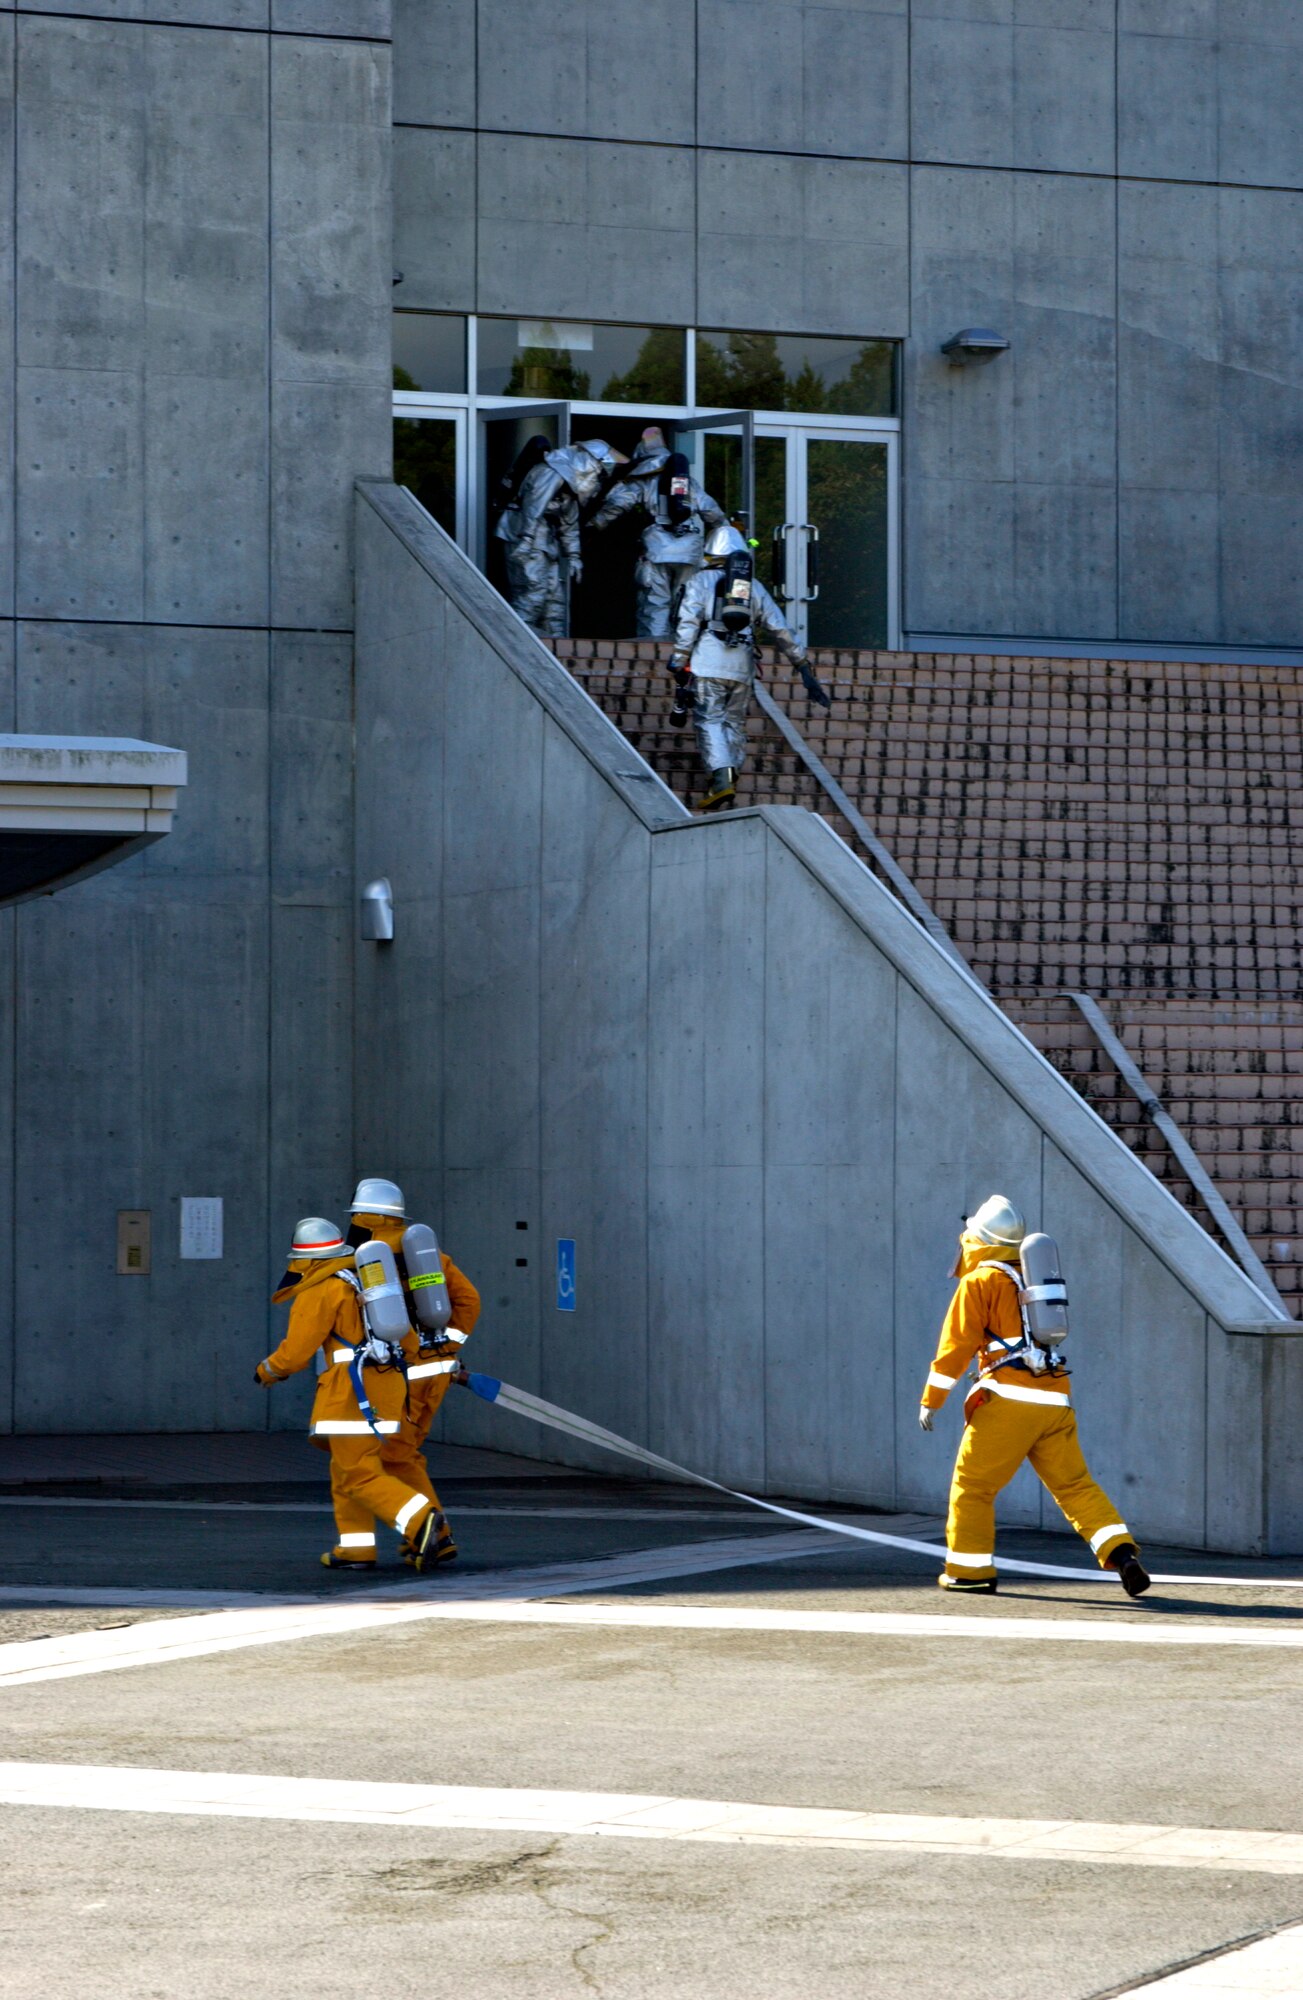 MISAWA AIR BASE, Japan -- Misawa City and Misawa Air Base Firefighters enter the Misawa Ice Arena to rescue victims as part of a Misawa City Disaster Preparation Exercise Oct. 14, 2007. This exercise involved personnel from the United States Air Force and Navy as well as Misawa City. (US Air Force photo by Airman 1st Class Eric Harris)(RELEASED)